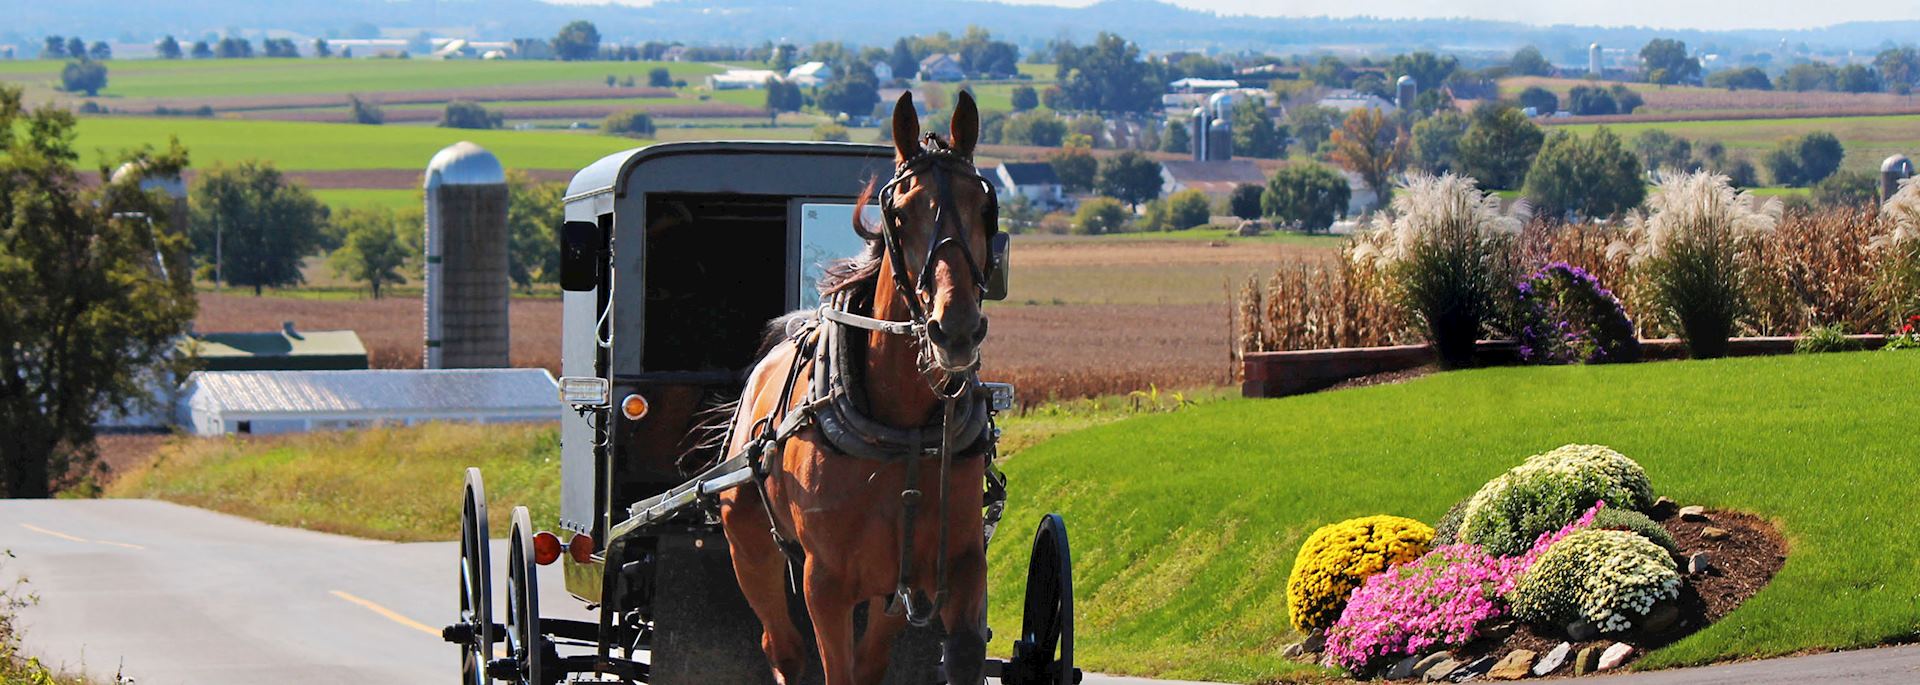 Amish horse drawn carriage